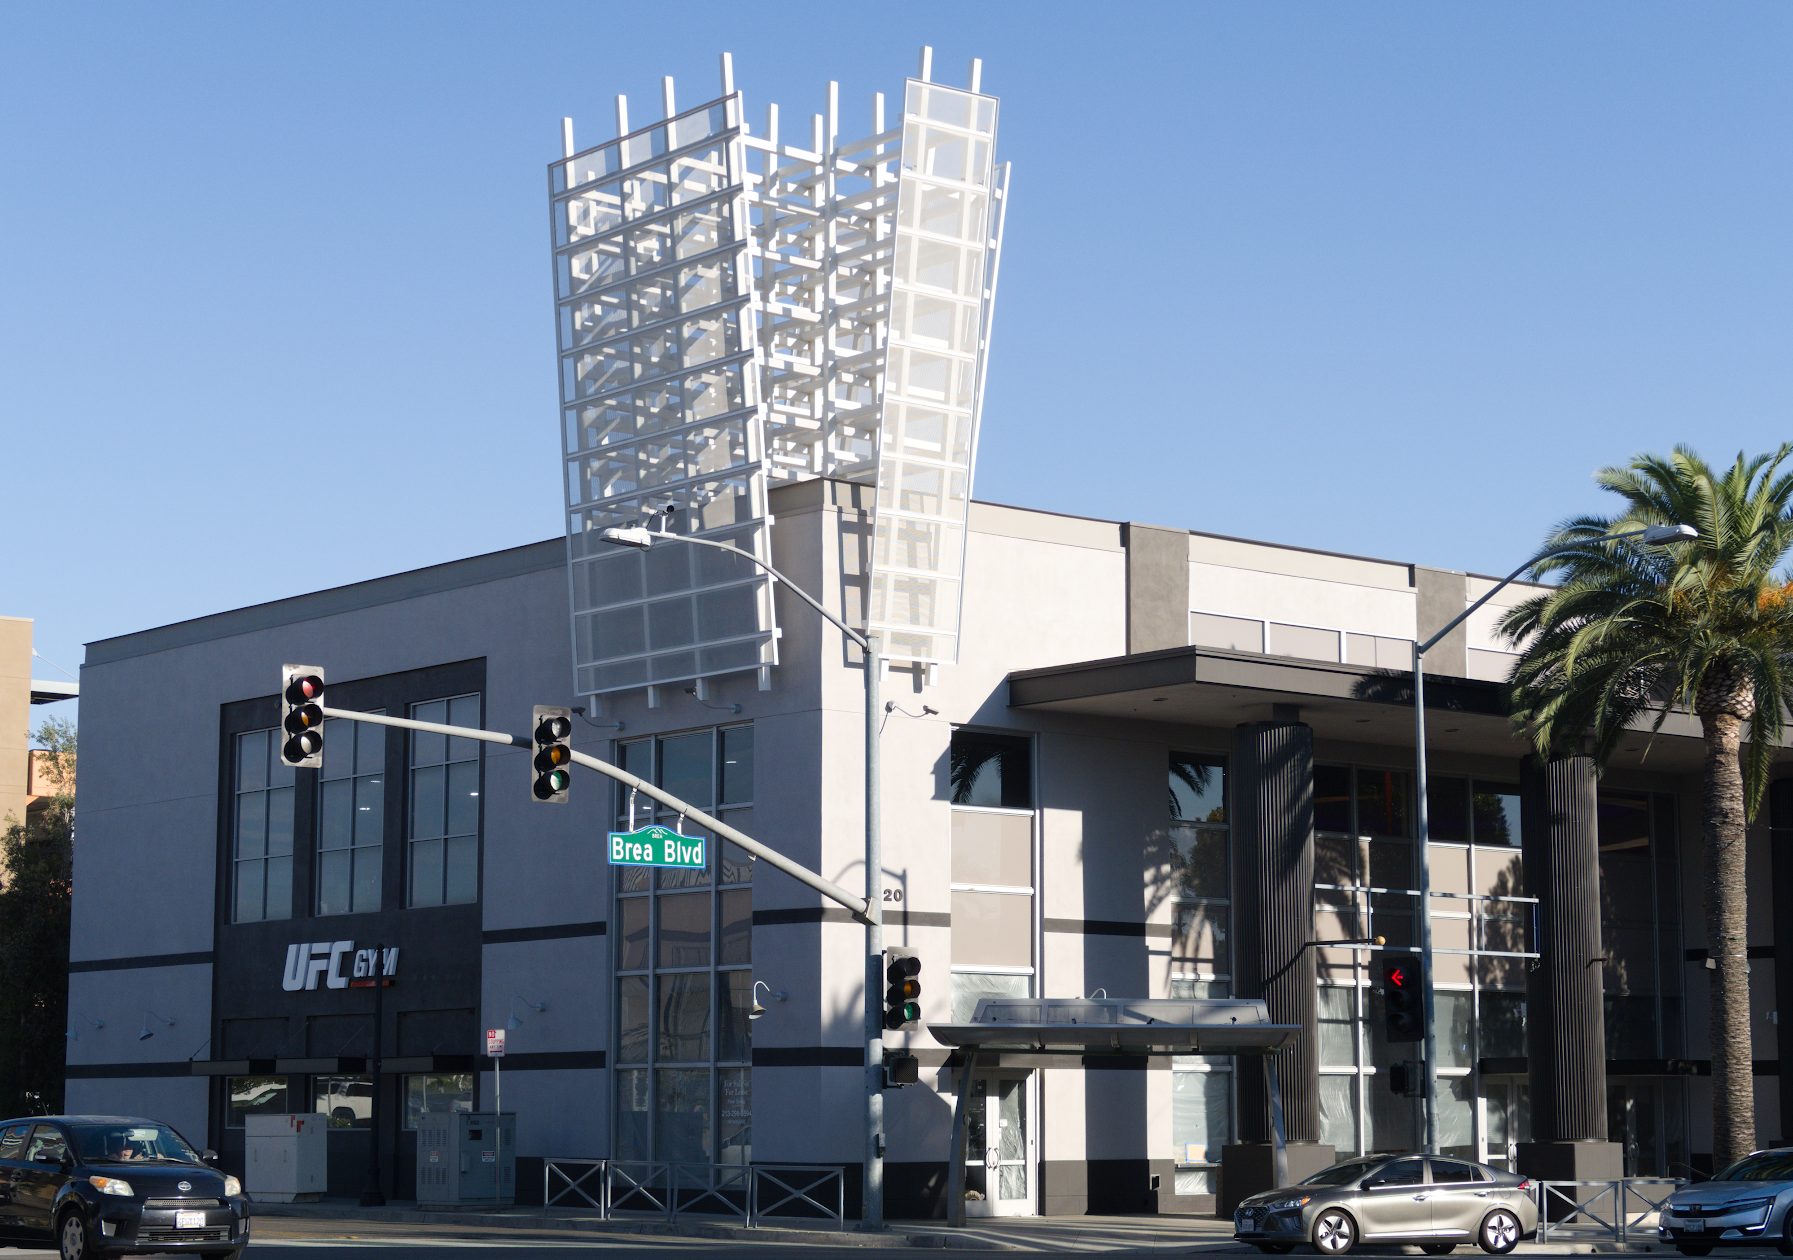 The exterior of the UFC Gym at 220 South Brea Blvd. The former Tower Records site went 15 years before landing a permanent tenant. 